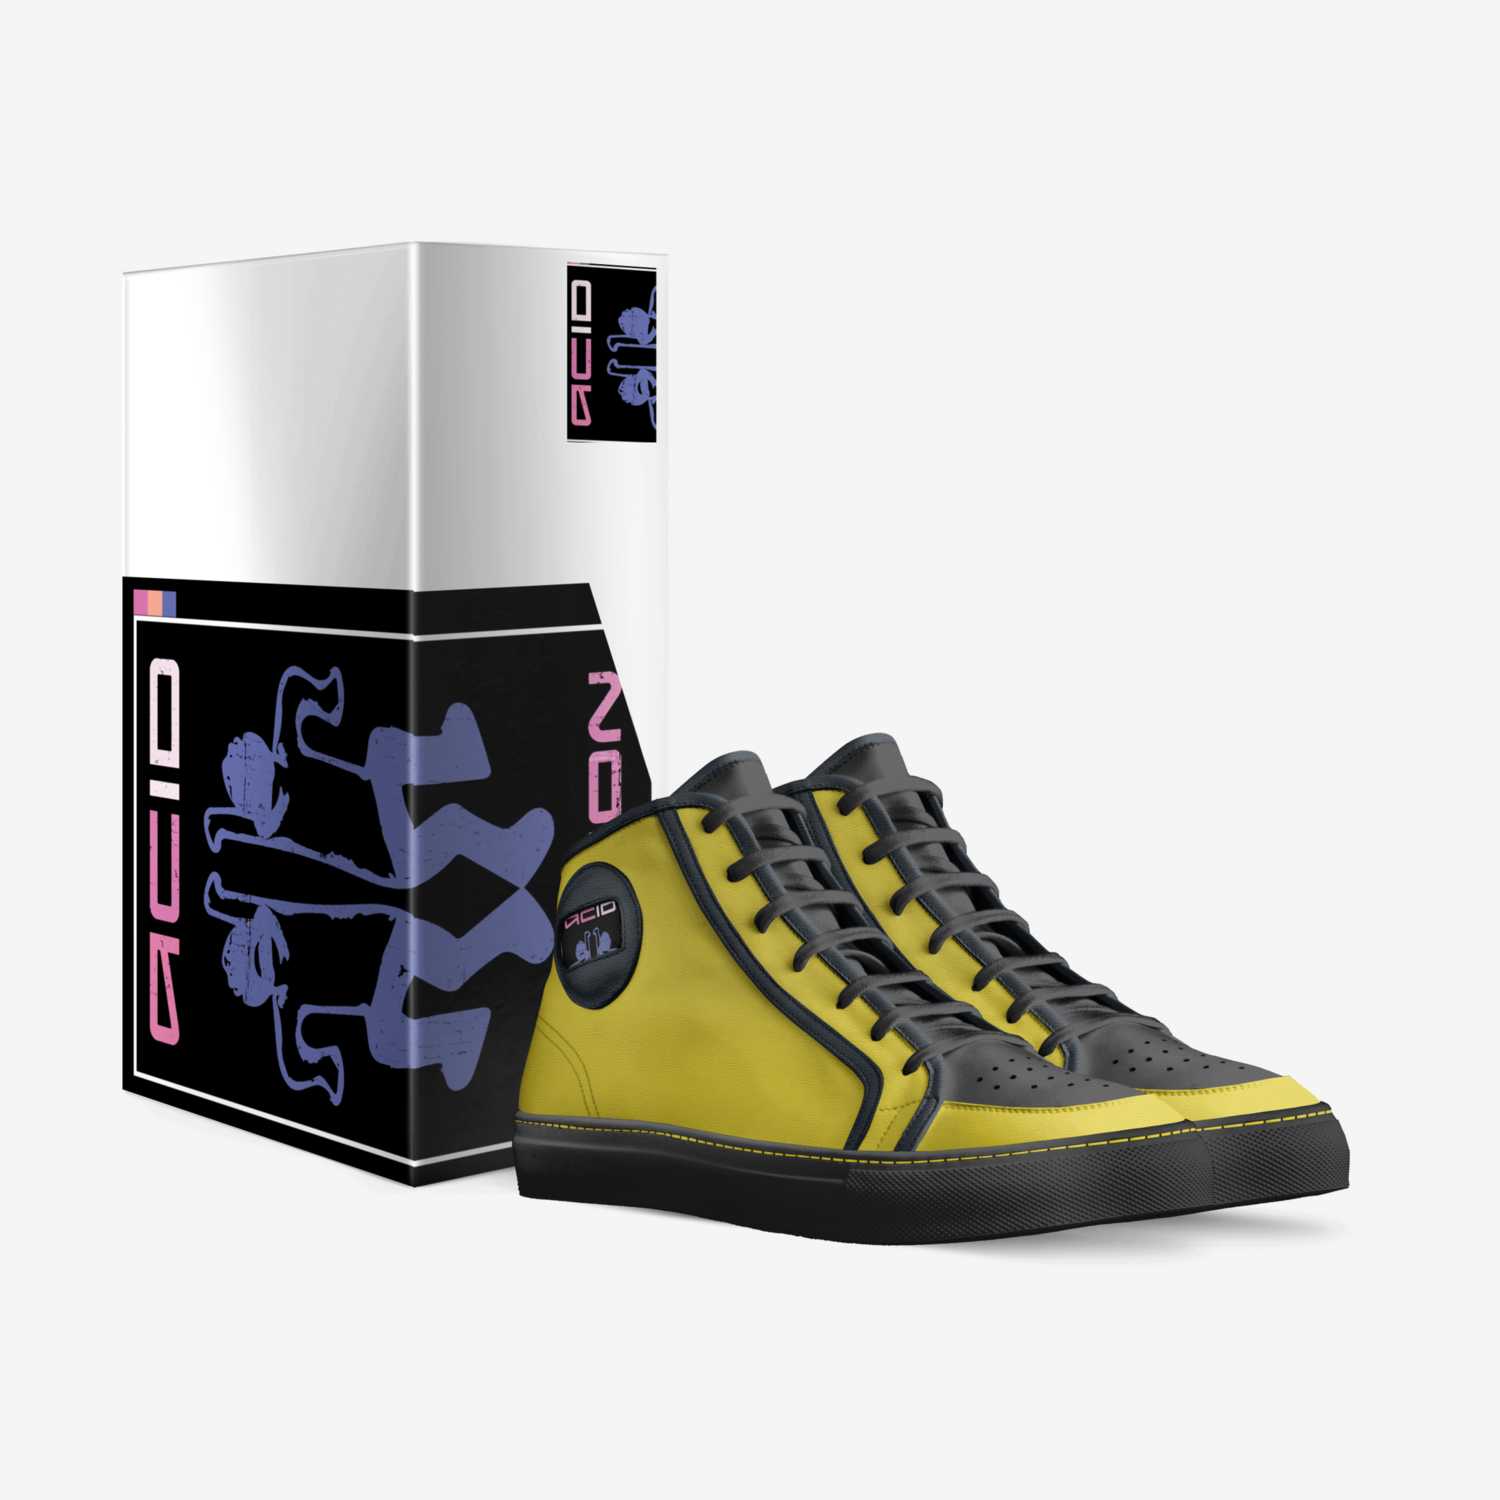 ACiD NATiON custom made in Italy shoes by Phuture Jones | Box view